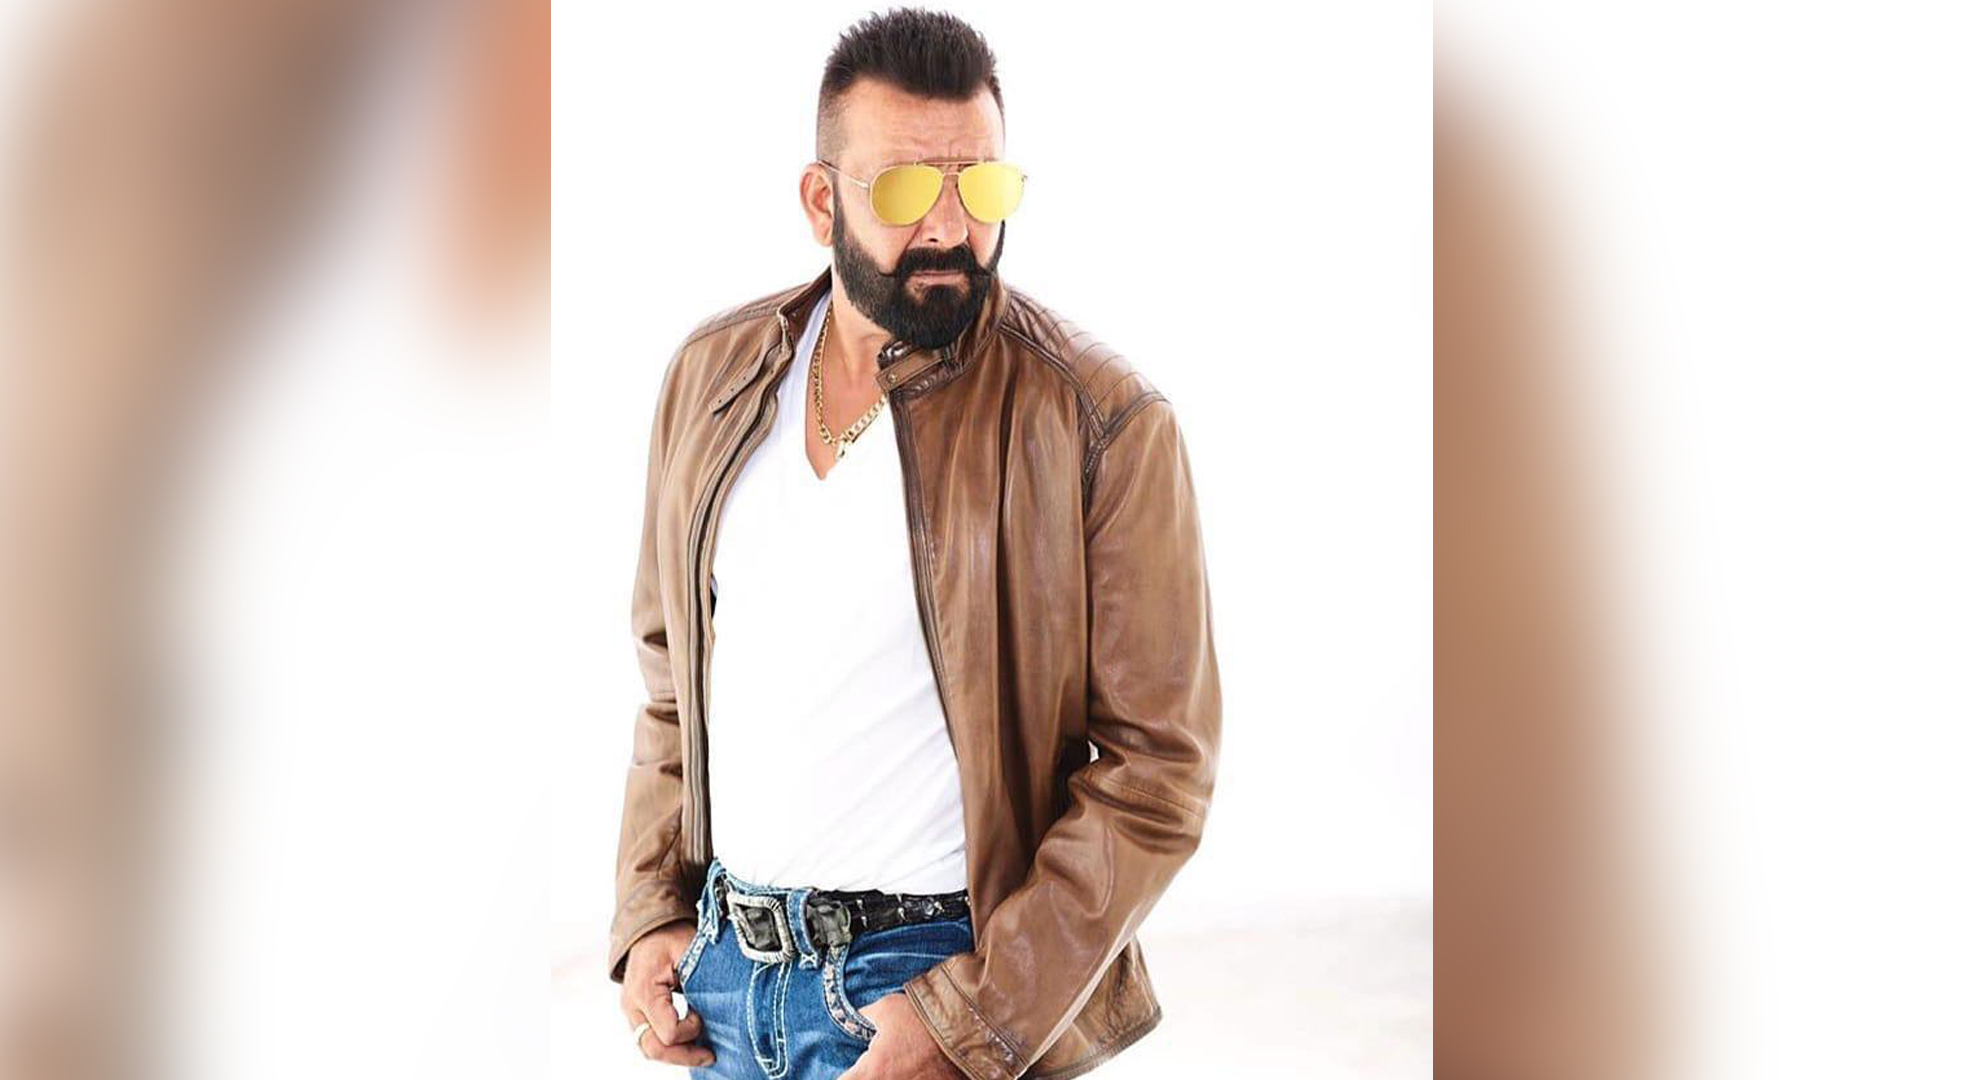 Sanjay Dutt lauds the efforts of I stand with humanity initiative